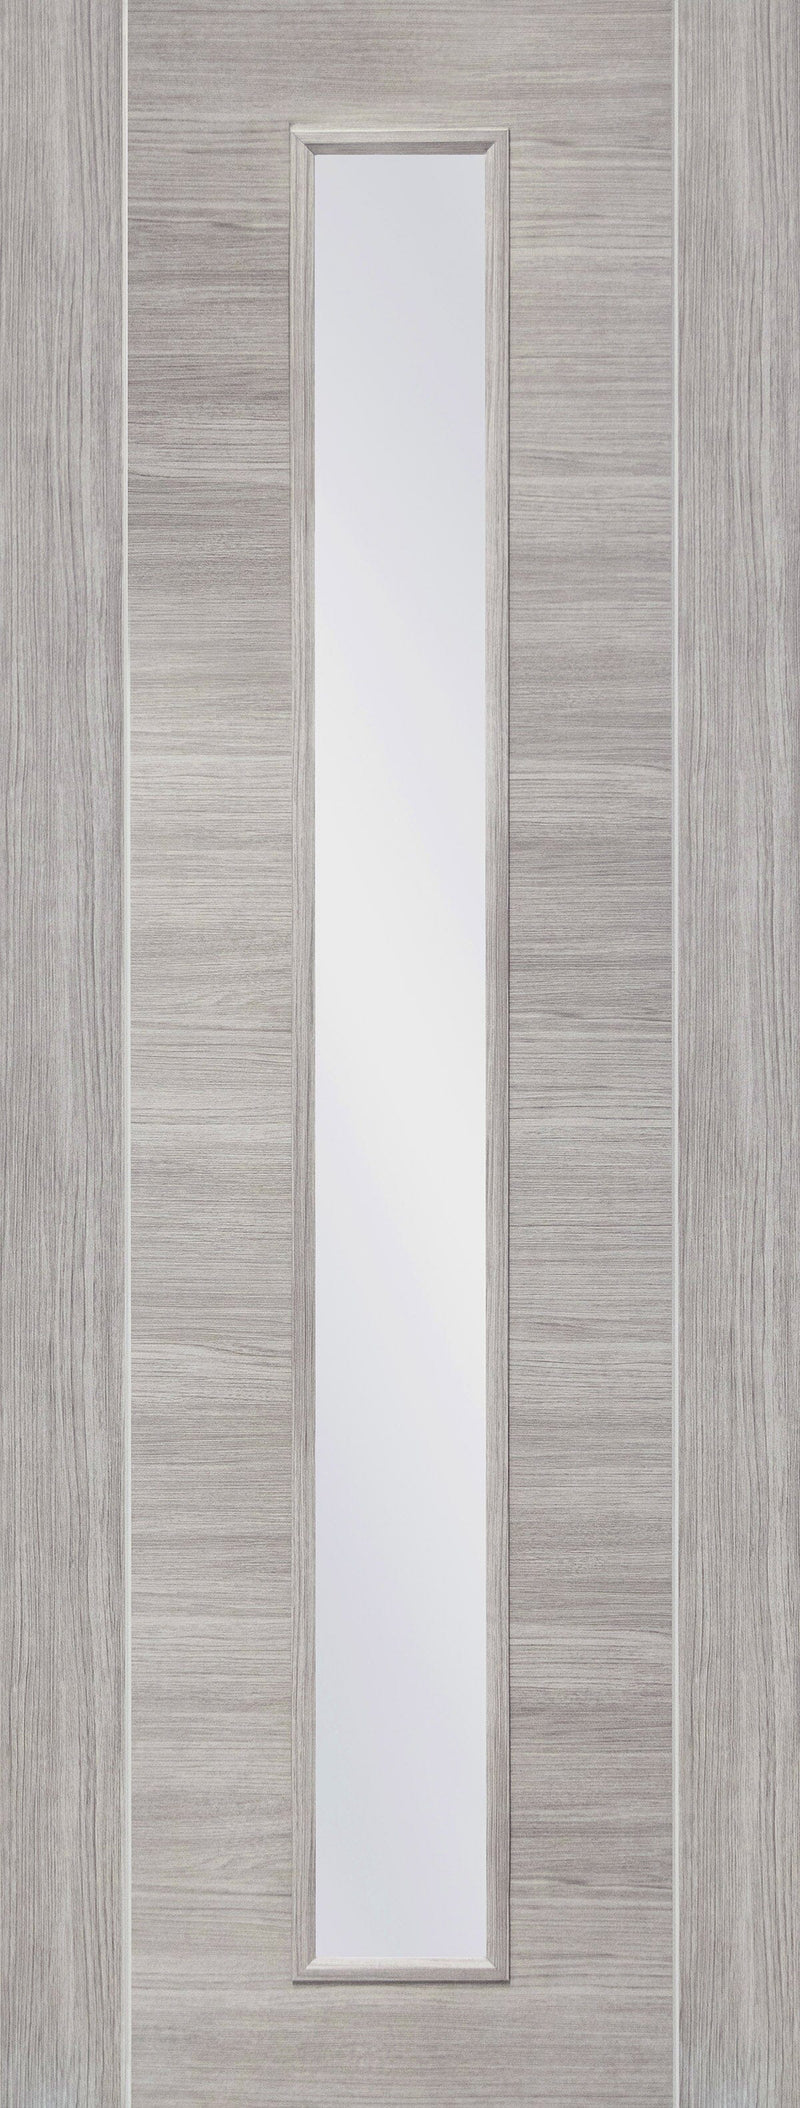 Laminate White Grey Forli Pre-Finished Internal Door with Clear Glass